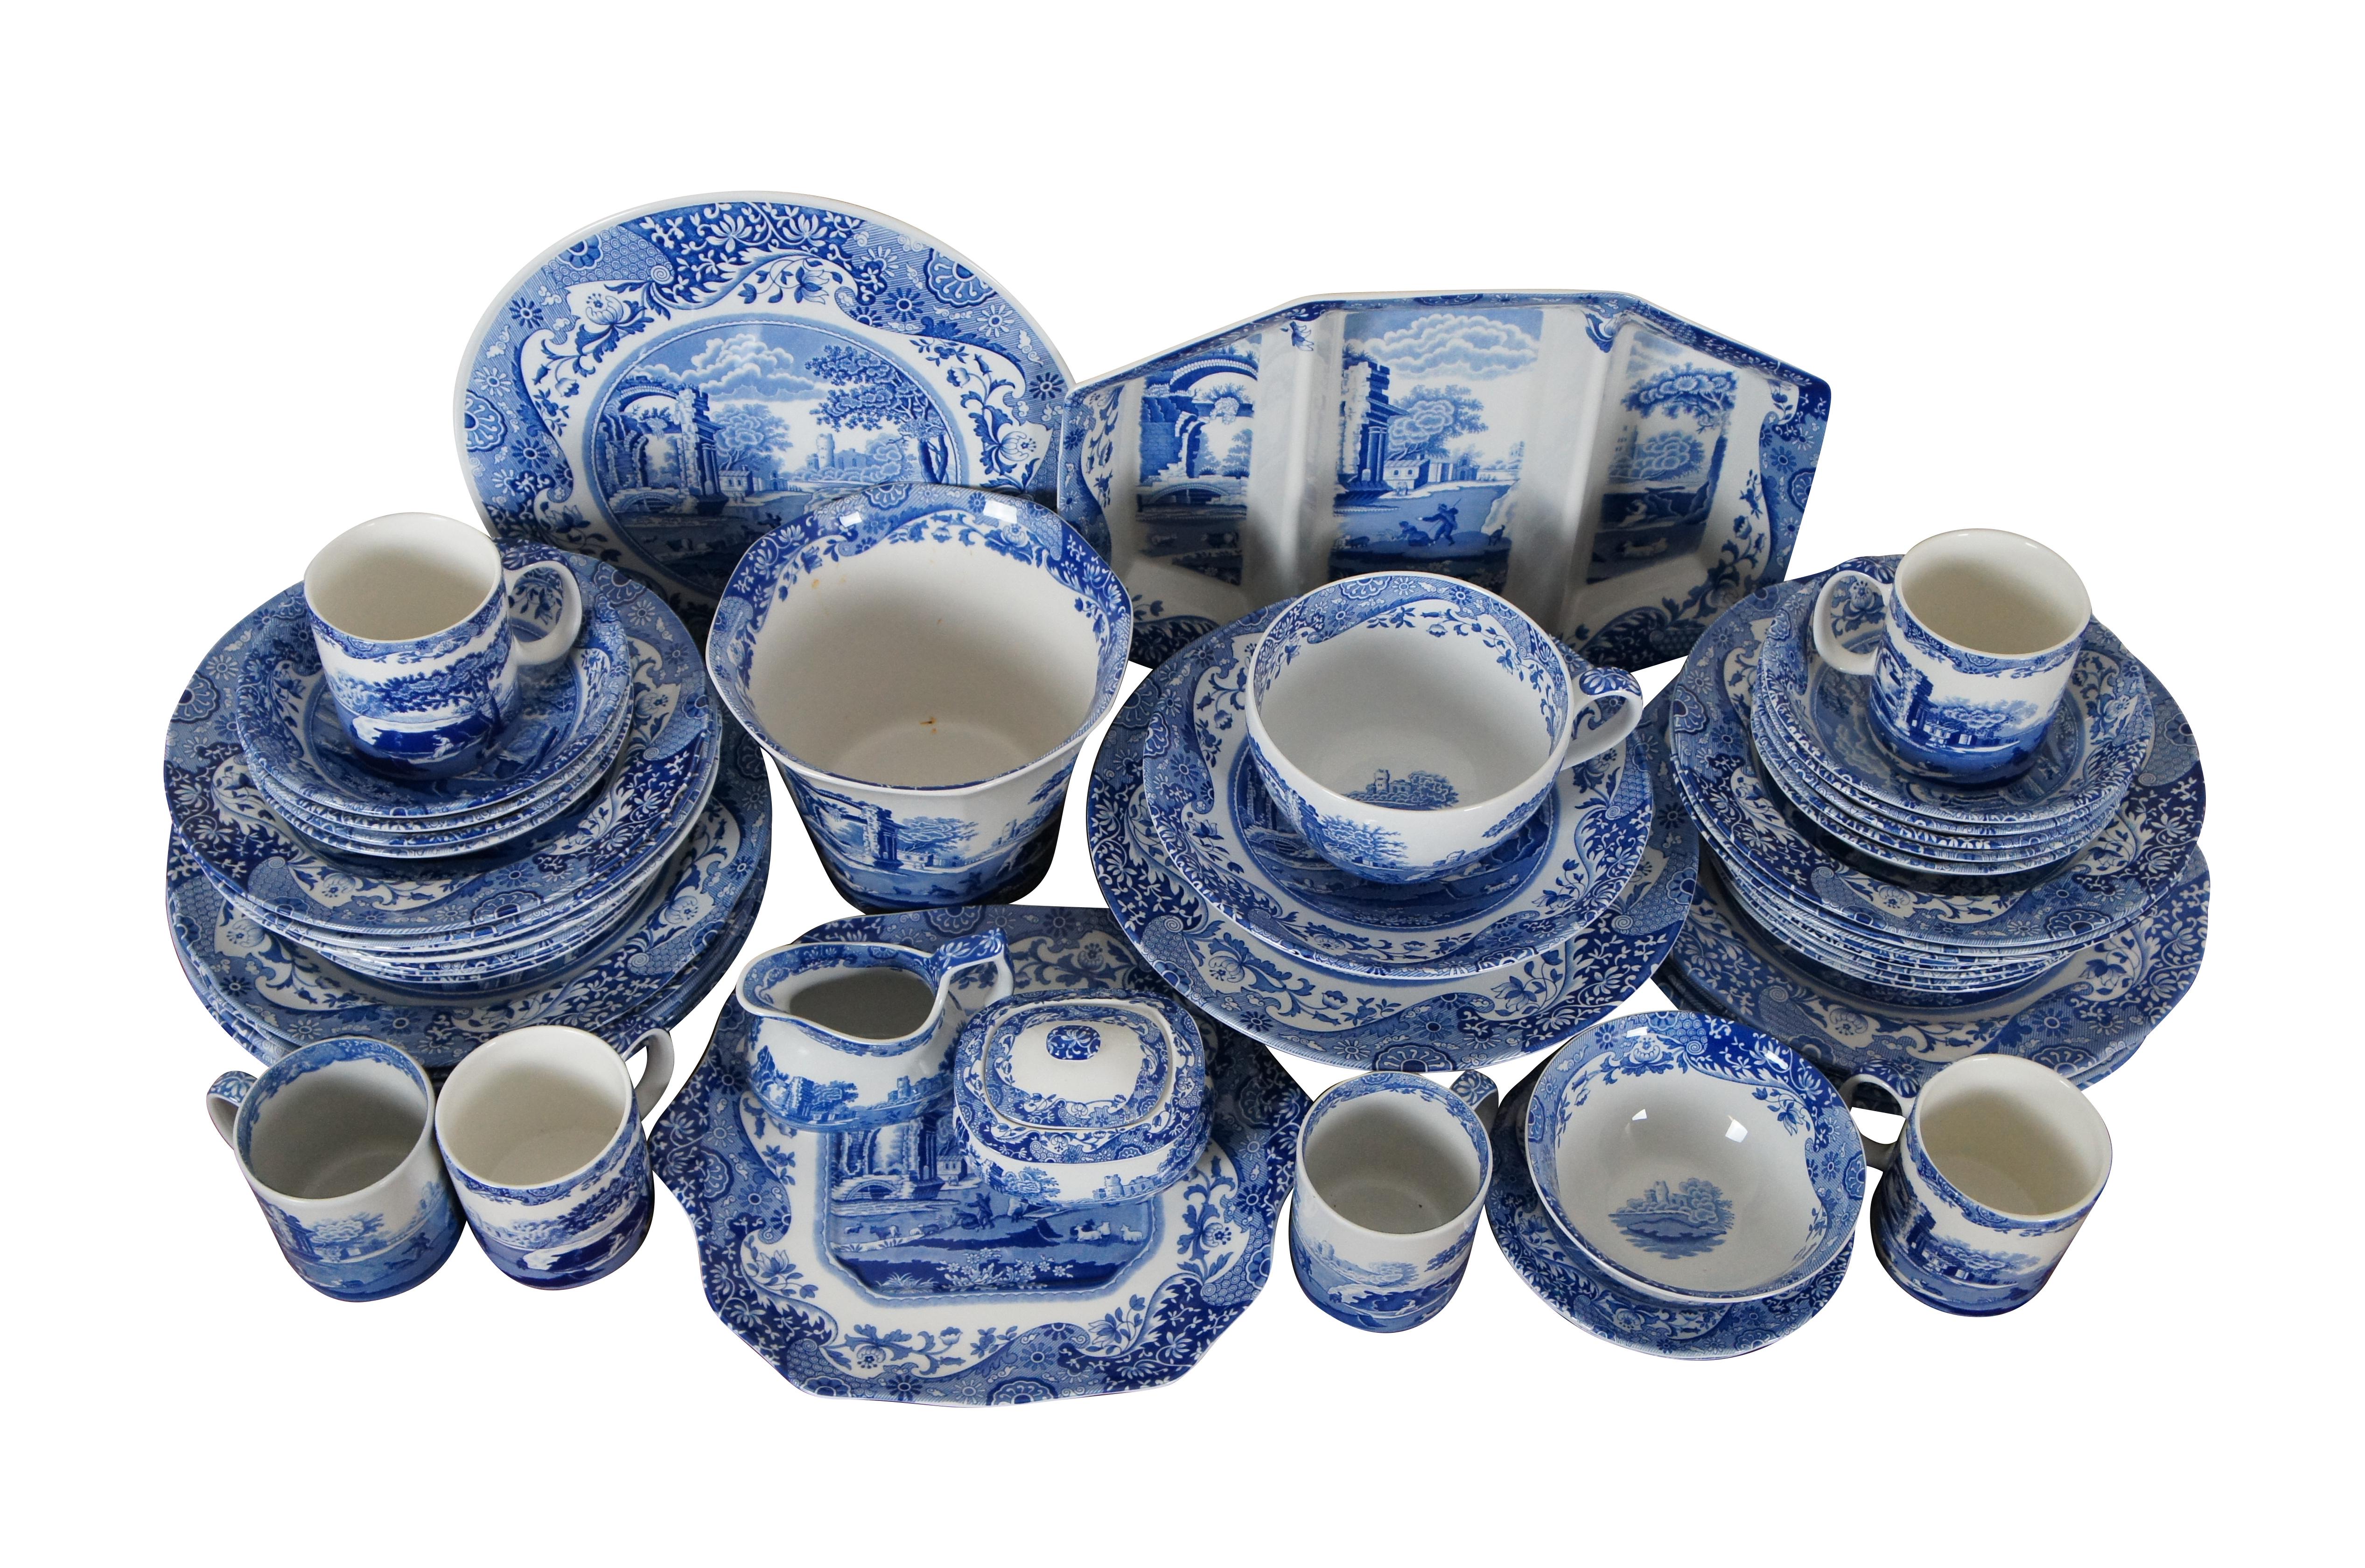 55 piece Spode dinnerware china set in the Blue Italian pattern. “The iconic Blue Italian was launched in 1816 and in production ever since. Featuring a finely detailed 18th century Imari Oriental border encompassing a scene inspired by the Italian